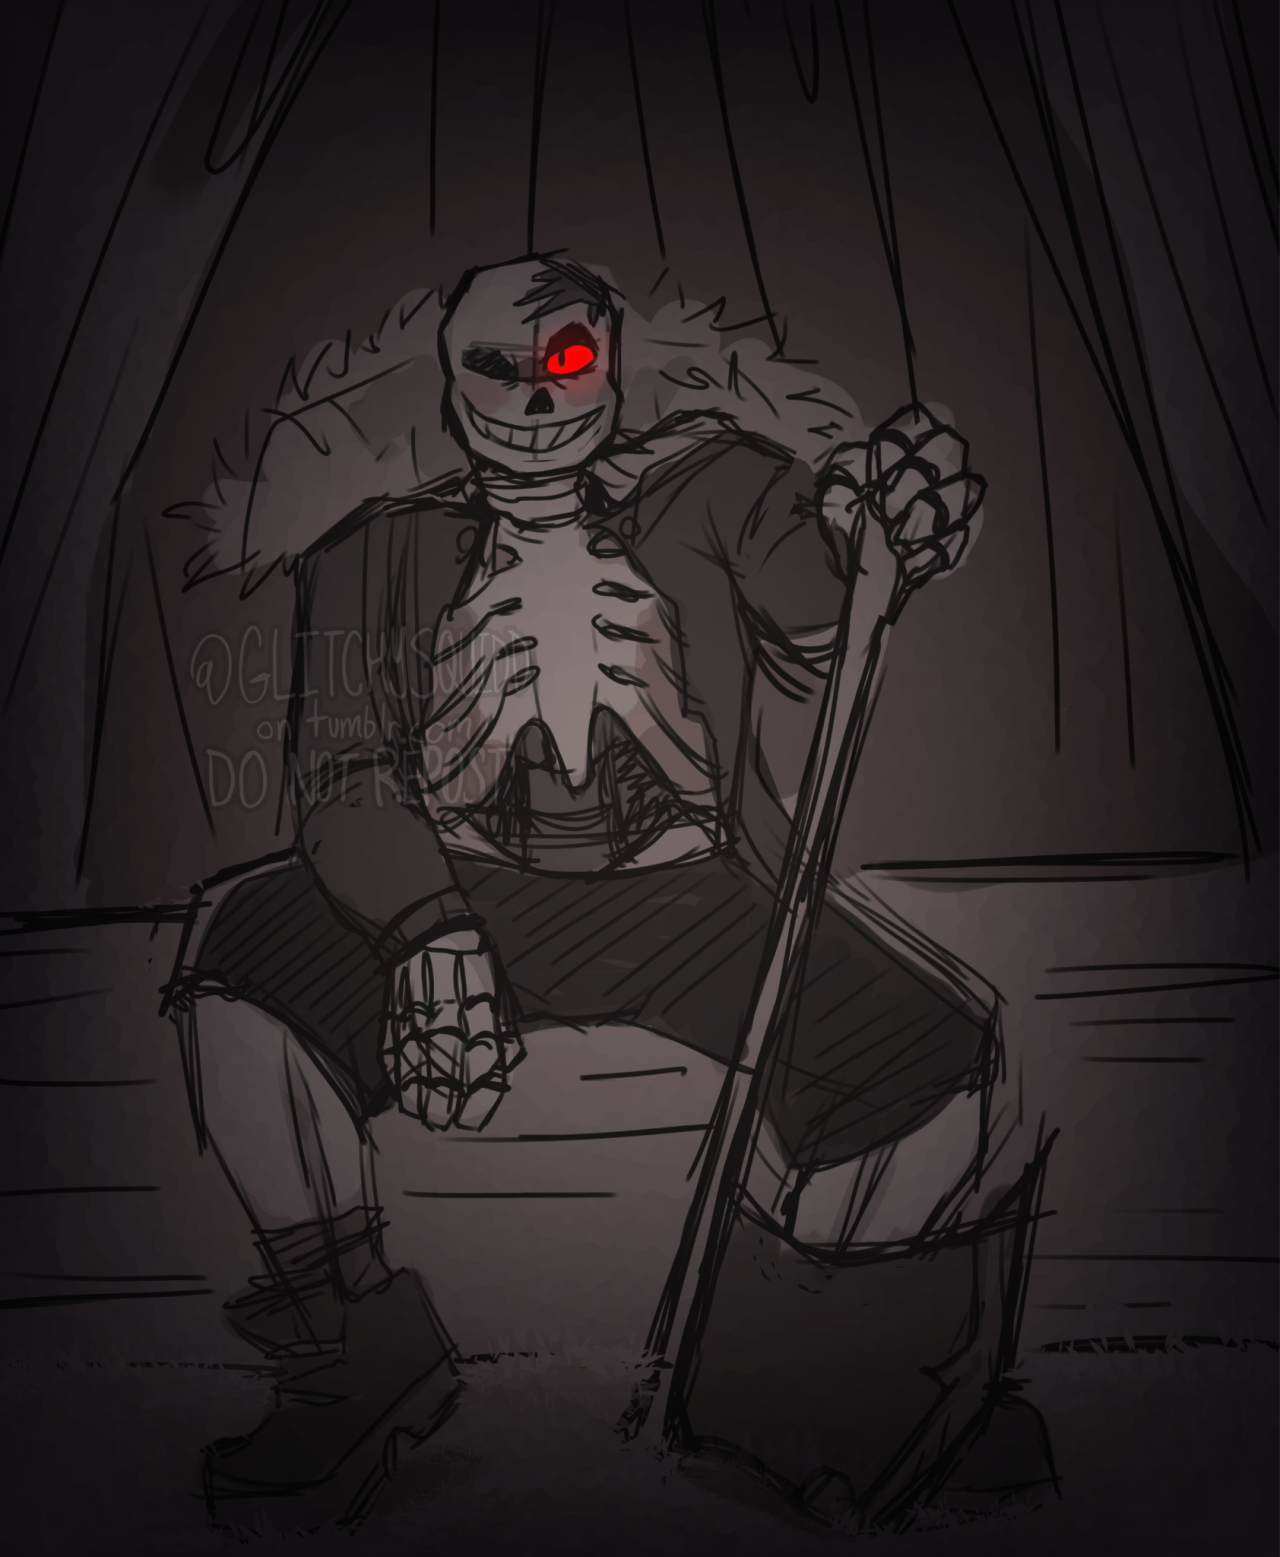 indefinite hiatus. — someone asked for horror sans but I don't really